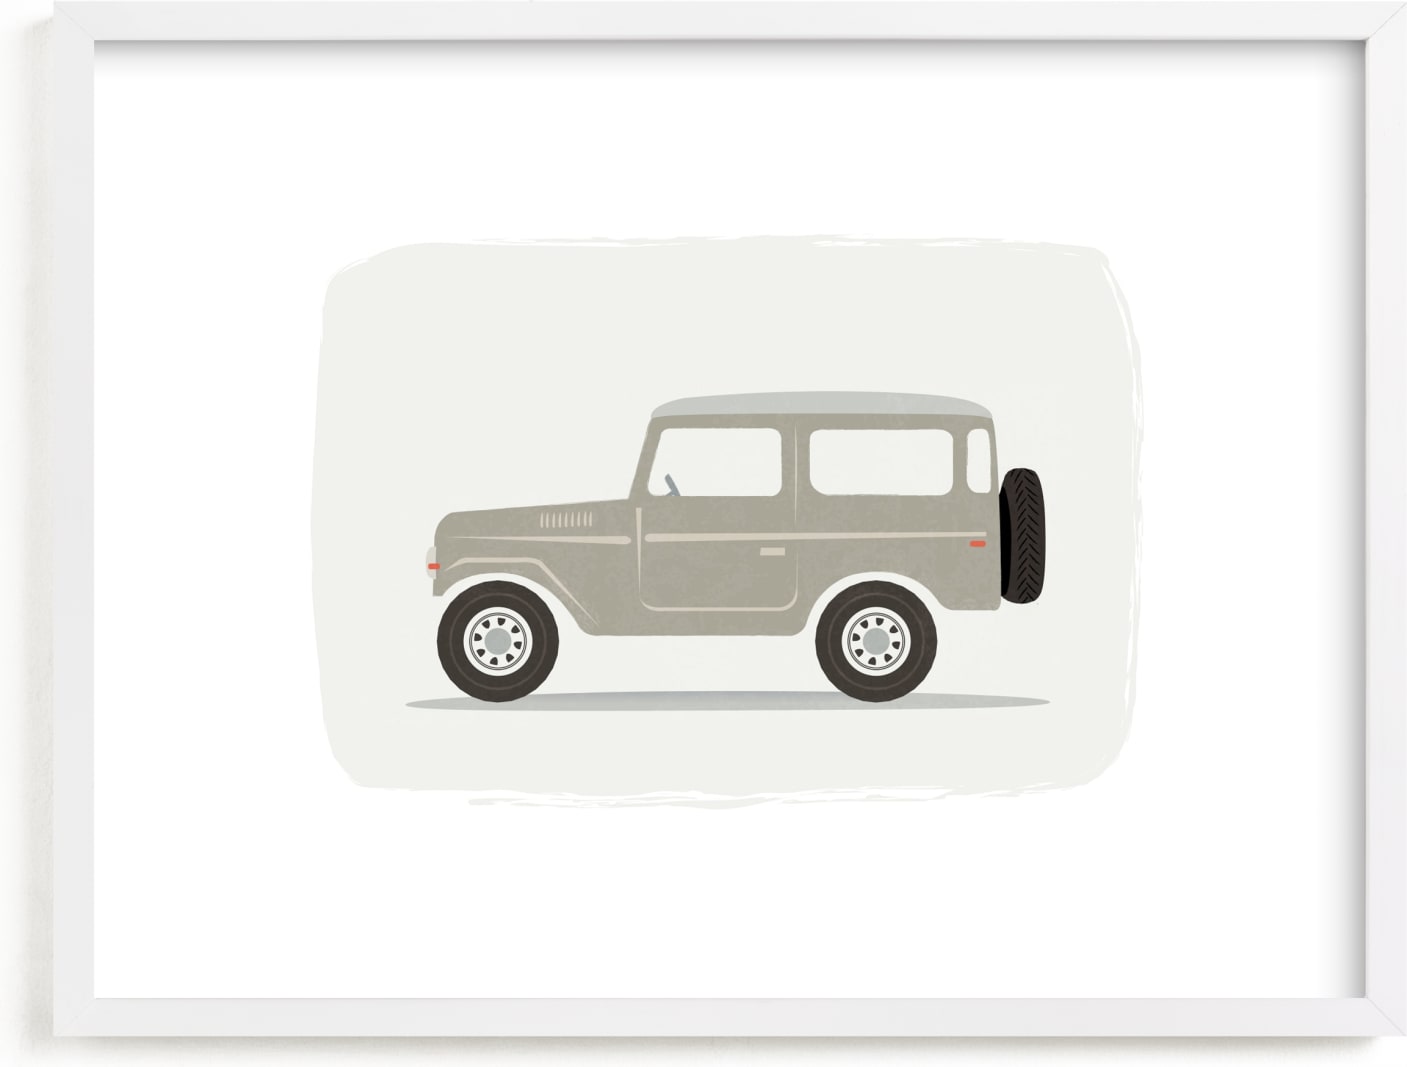 This is a white art by Karidy Walker called Vintage Land Cruiser.